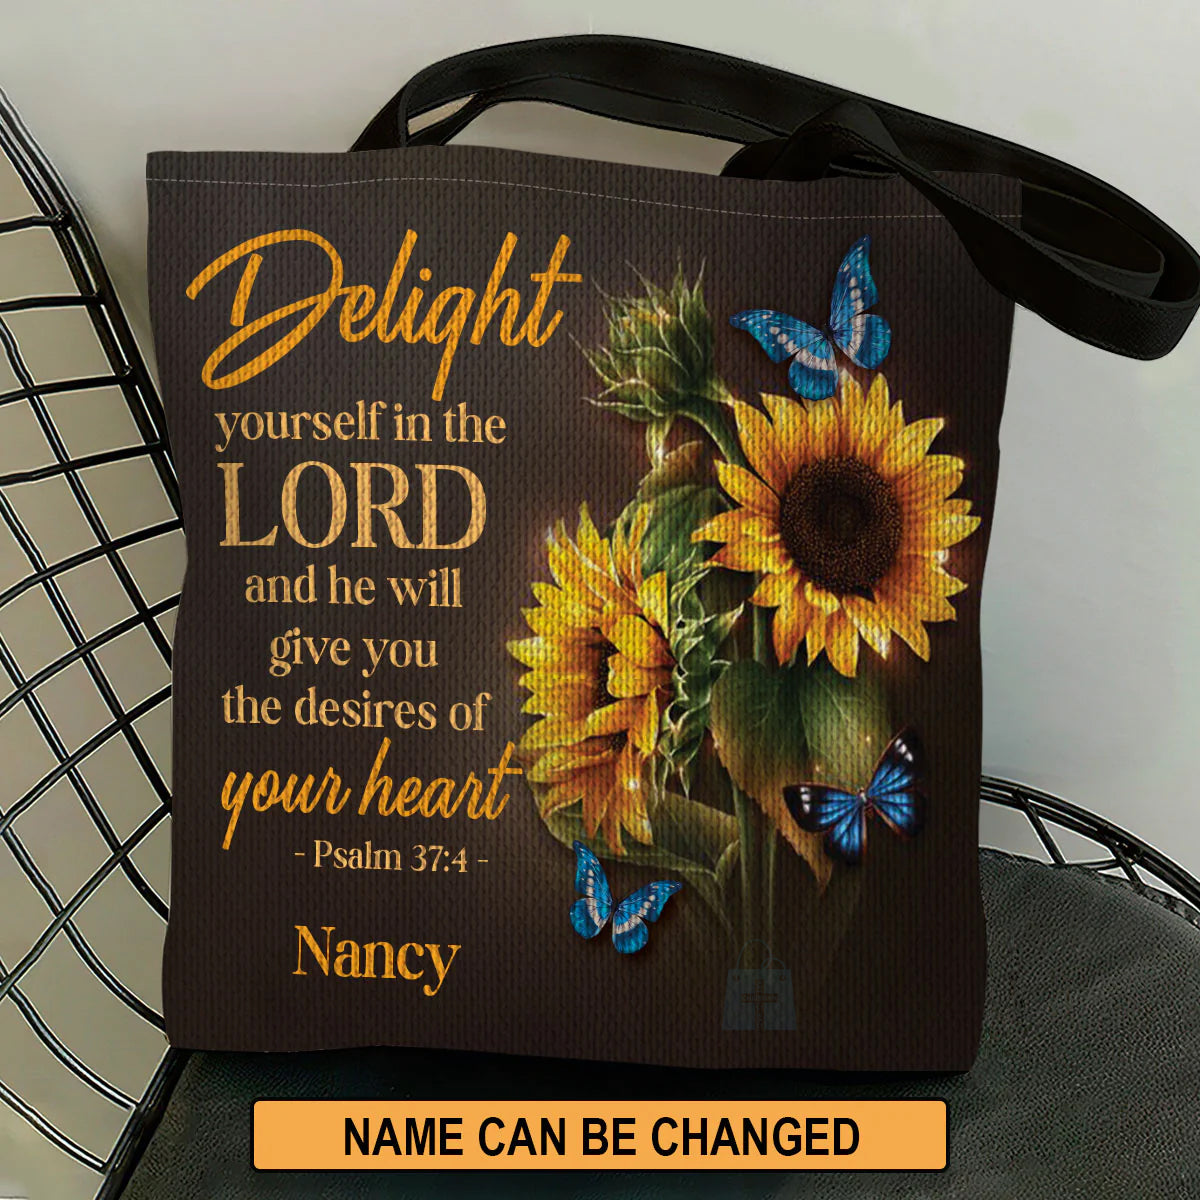 Christianart Designer Handbags, Delight Yourself In The Lord, Personalized Gifts, Gifts for Women. - Christian Art Bag